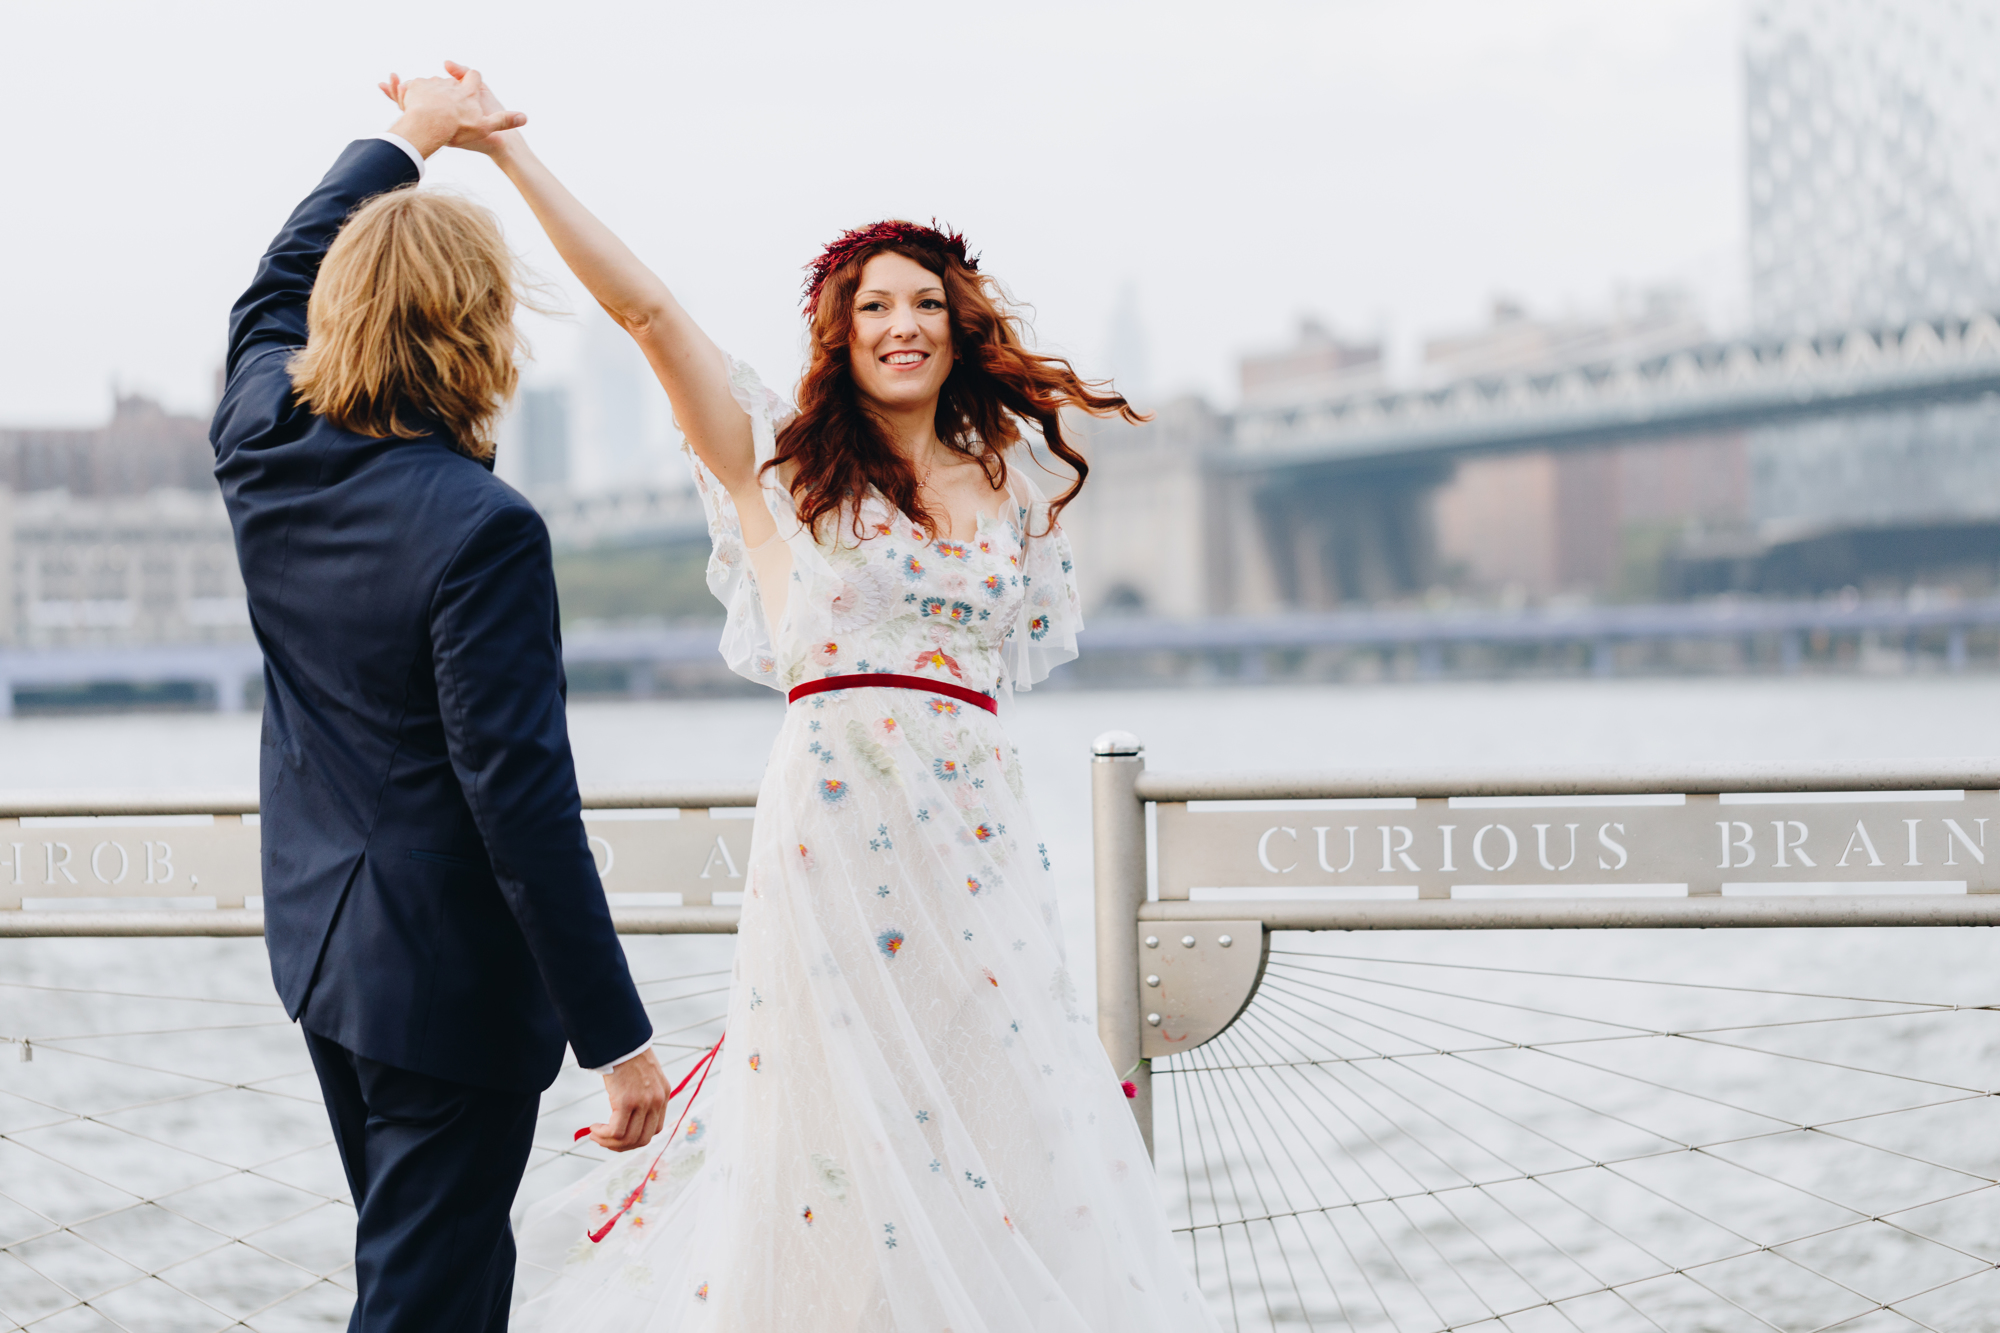 River Café wedding in Dumbo Brooklyn with colorful dress